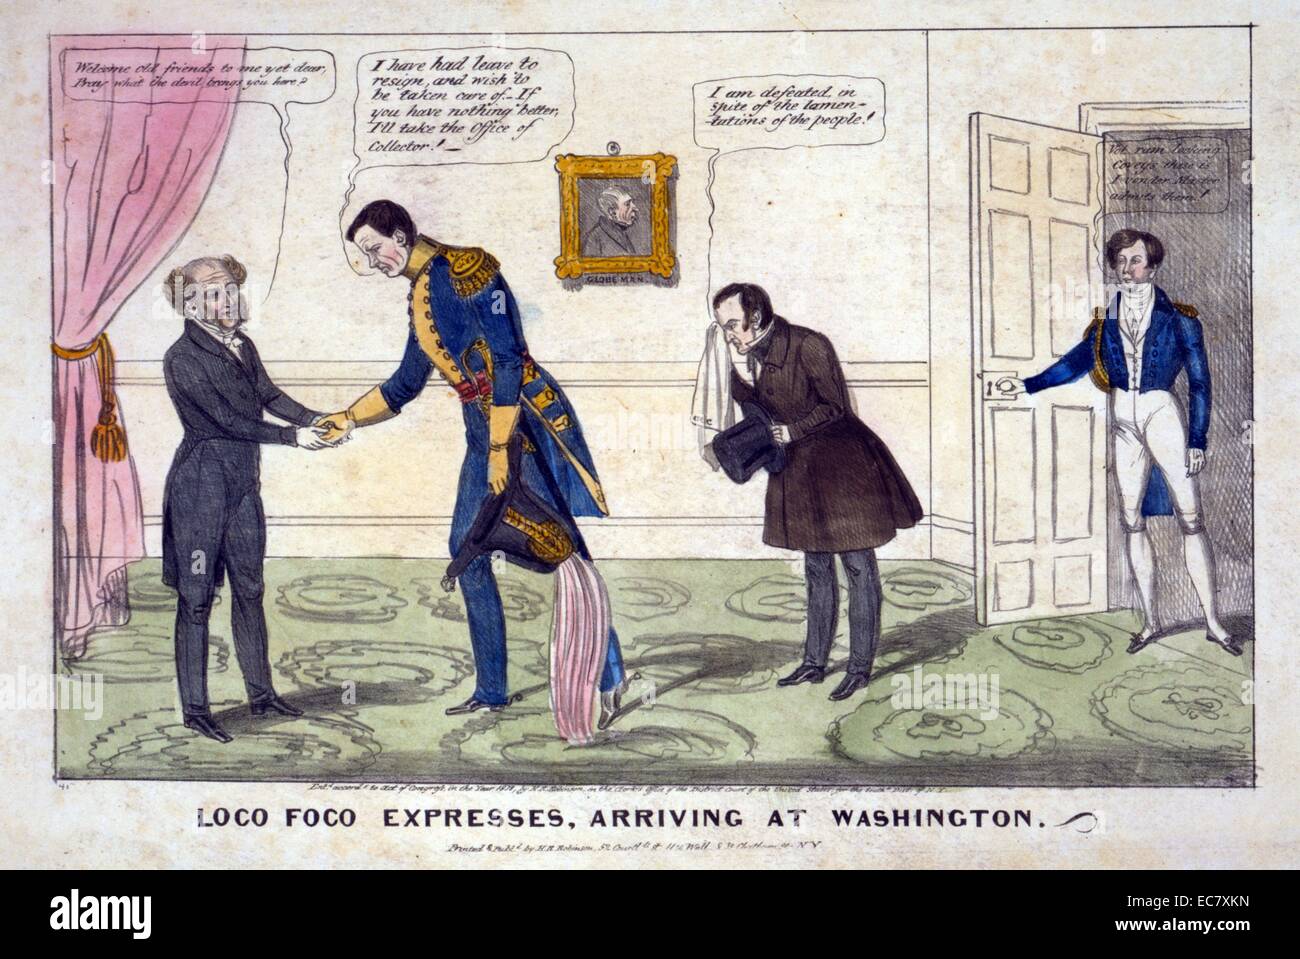 Loco Foco expresses, arriving at Washington' A satiric commentary on the effects of the landslide Whig victory in New York state elections in the autumn of 1838. President Van Buren (left) greets two of his defeated allies: incumbent governor William L. Marcy (center, in uniform) and Representative Churchill C. Cambreleng. Both men had the support of New York radical Democrats, or 'Loco Focos.' Stock Photo